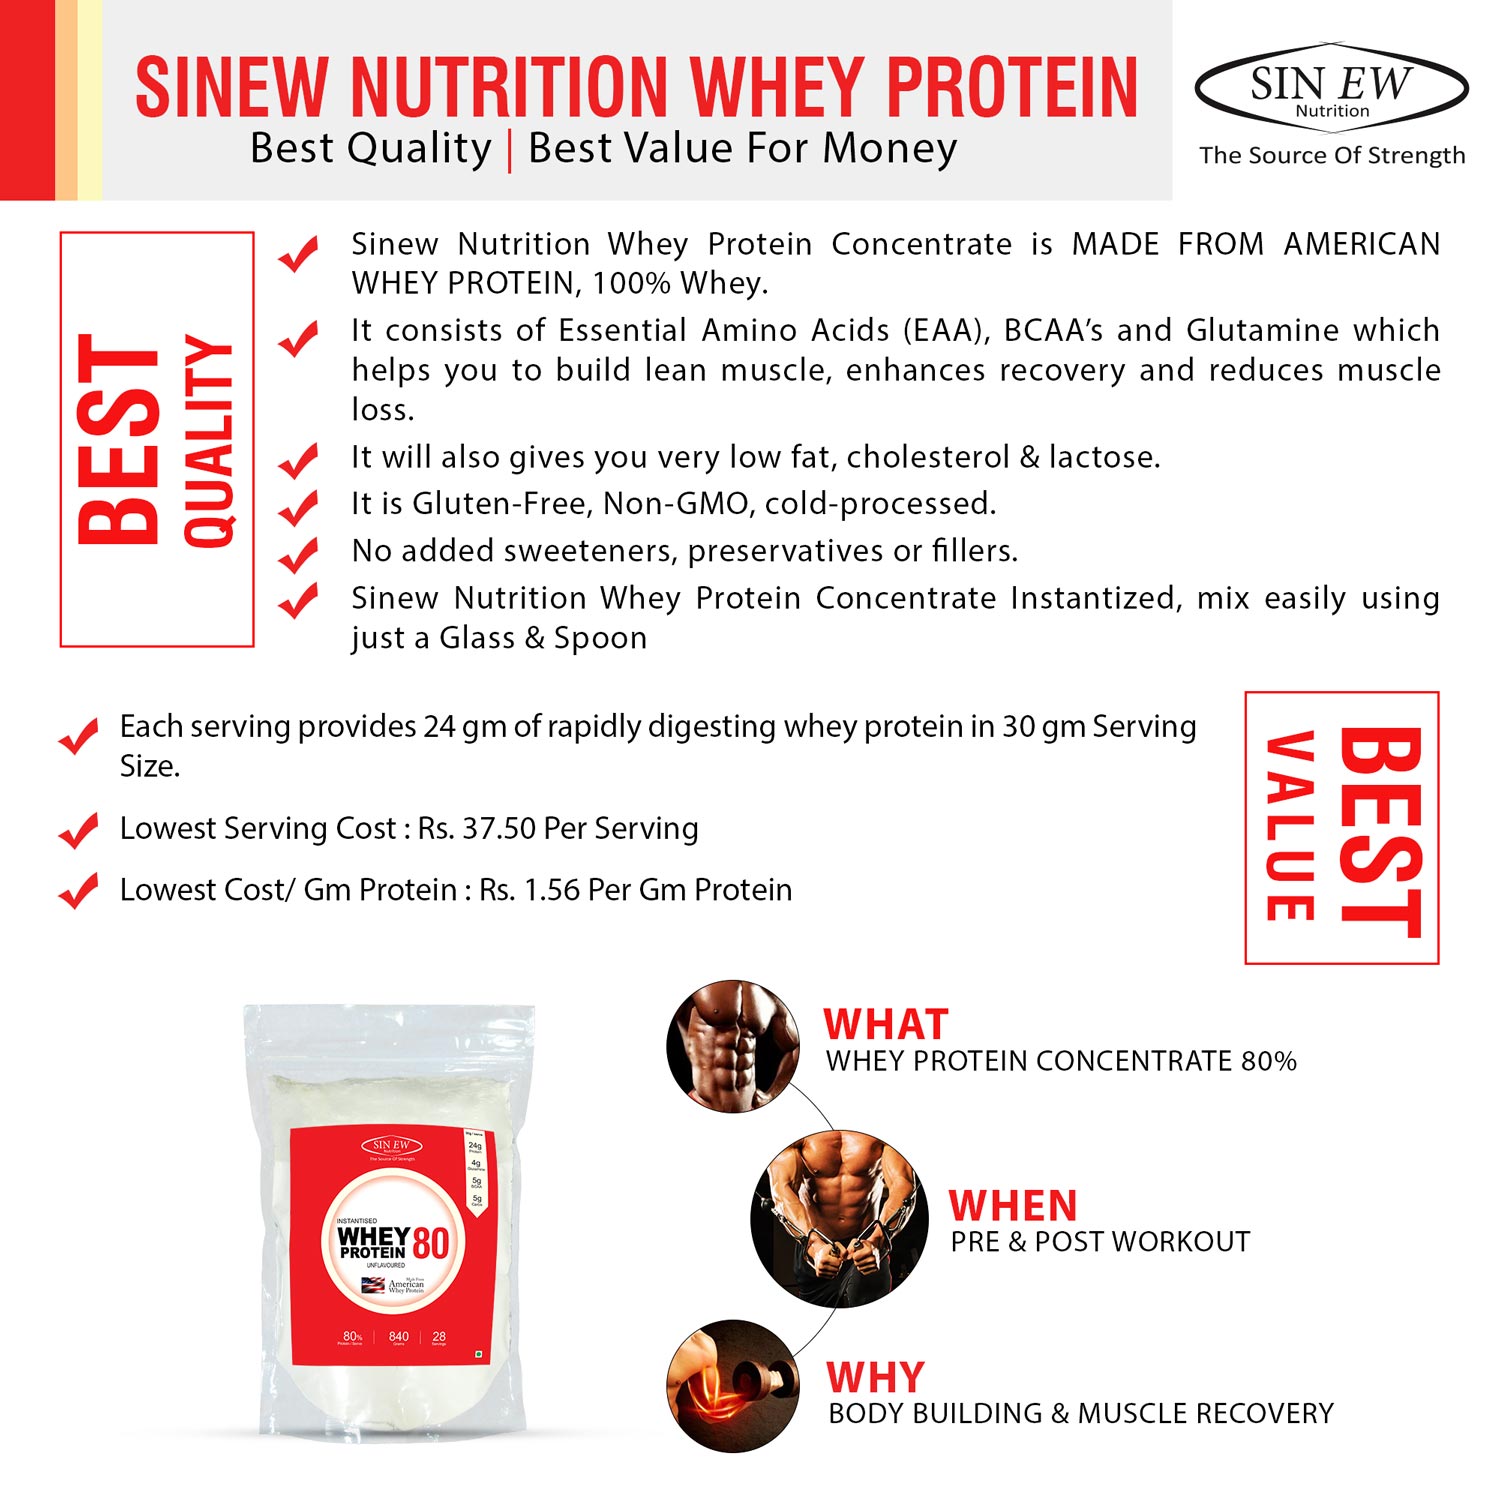 Whey Protein Image 2nd